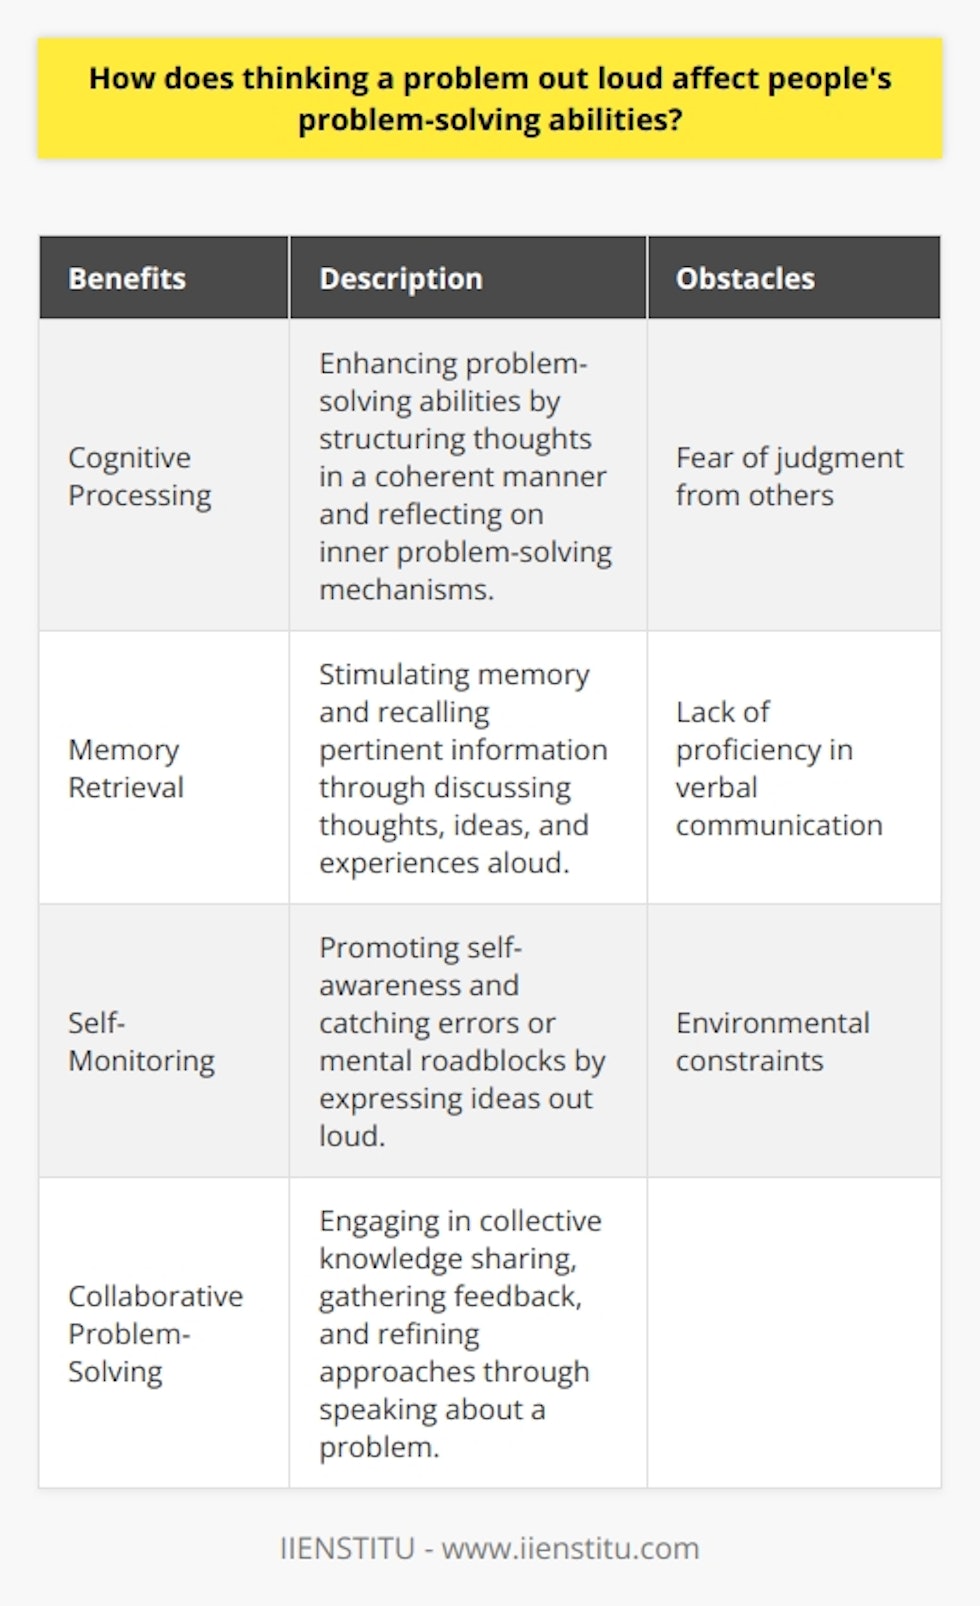 Thinking a problem out loud, or verbalizing, can have significant effects on people's problem-solving abilities. By vocalizing their thoughts and thought process, individuals can enhance their cognitive processing, facilitate memory retrieval, promote self-monitoring, and encourage collaborative problem-solving.Verbalizing a problem allows individuals to structure their thoughts in a coherent manner. As they explain their thought process, they engage in deeper reflection and connect with their inner problem-solving mechanisms. This ultimately leads to a more effective solution.Additionally, talking through a problem can stimulate memory retrieval. By discussing their thoughts, ideas, or relevant experiences aloud, individuals can activate their memory and recall more pertinent information. This increased access to critical knowledge and resources contributes to finding solutions more efficiently.Moreover, verbalizing one's thoughts promotes self-monitoring. When individuals express their ideas out loud, they become more aware of their thought process. This heightened self-awareness allows them to catch errors and adjust their approach accordingly. It also helps in identifying mental roadblocks, such as faulty assumptions or biases, that may hinder problem resolution.Furthermore, speaking about a problem enables collaborative problem-solving. Sharing ideas and information with others provides an opportunity to gather feedback, offer alternative solutions, and refine one's approach. This collective knowledge enhances the overall problem-solving process and increases the likelihood of finding the most effective solution.However, there are obstacles that can impede the effectiveness of verbalizing. Factors such as fear of judgment from others, lack of proficiency in verbal communication, and environmental constraints that do not permit speaking aloud can hinder the benefits of thinking a problem out loud. It is important to consider and address these factors to maximize the gains from verbalizing one's thoughts during problem-solving.To summarize, thinking a problem out loud has various benefits for problem-solving abilities. It enhances cognitive processing, facilitates memory retrieval, promotes self-monitoring, and encourages collaborative problem-solving. However, it is crucial to overcome possible obstructions to effectively utilize the advantages of verbalizing thoughts during problem-solving.